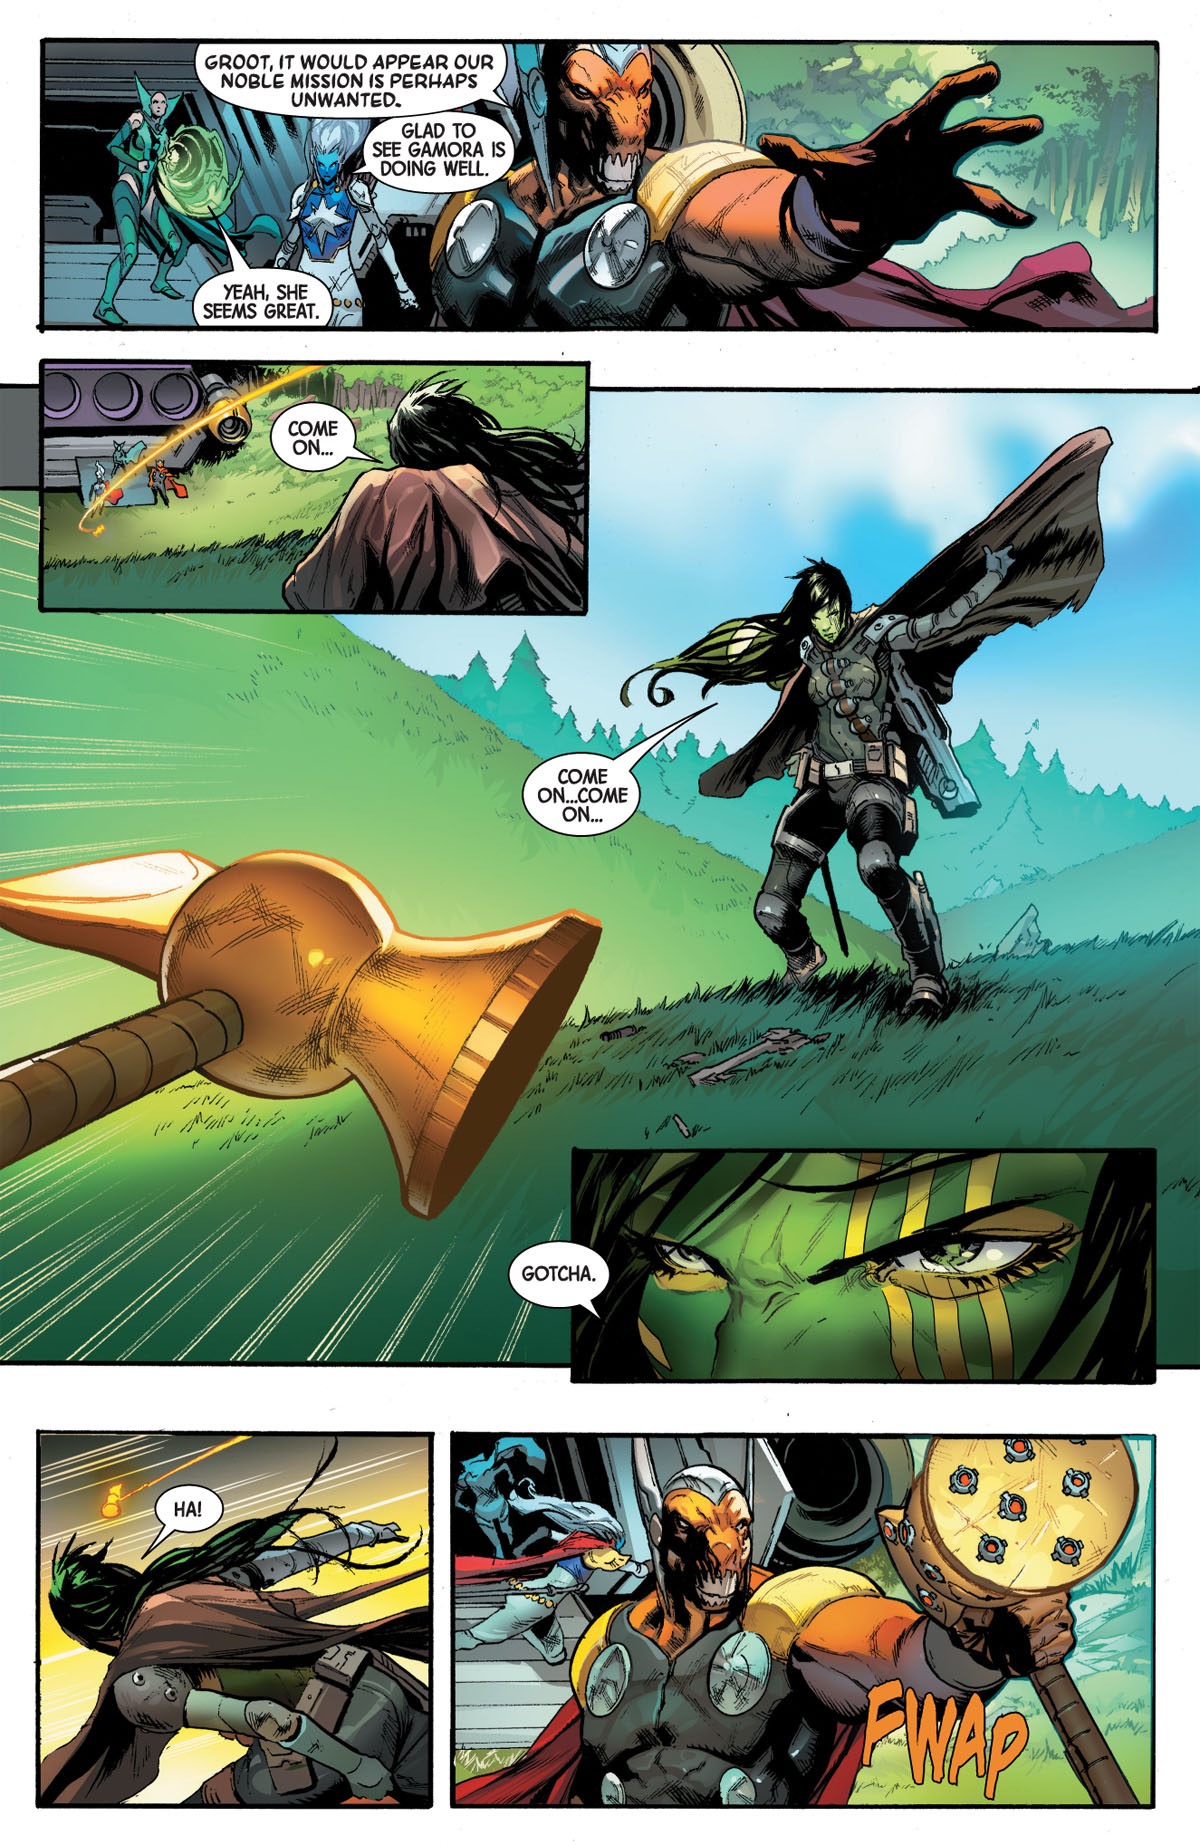 Guardians of the Galaxy #4 page 3